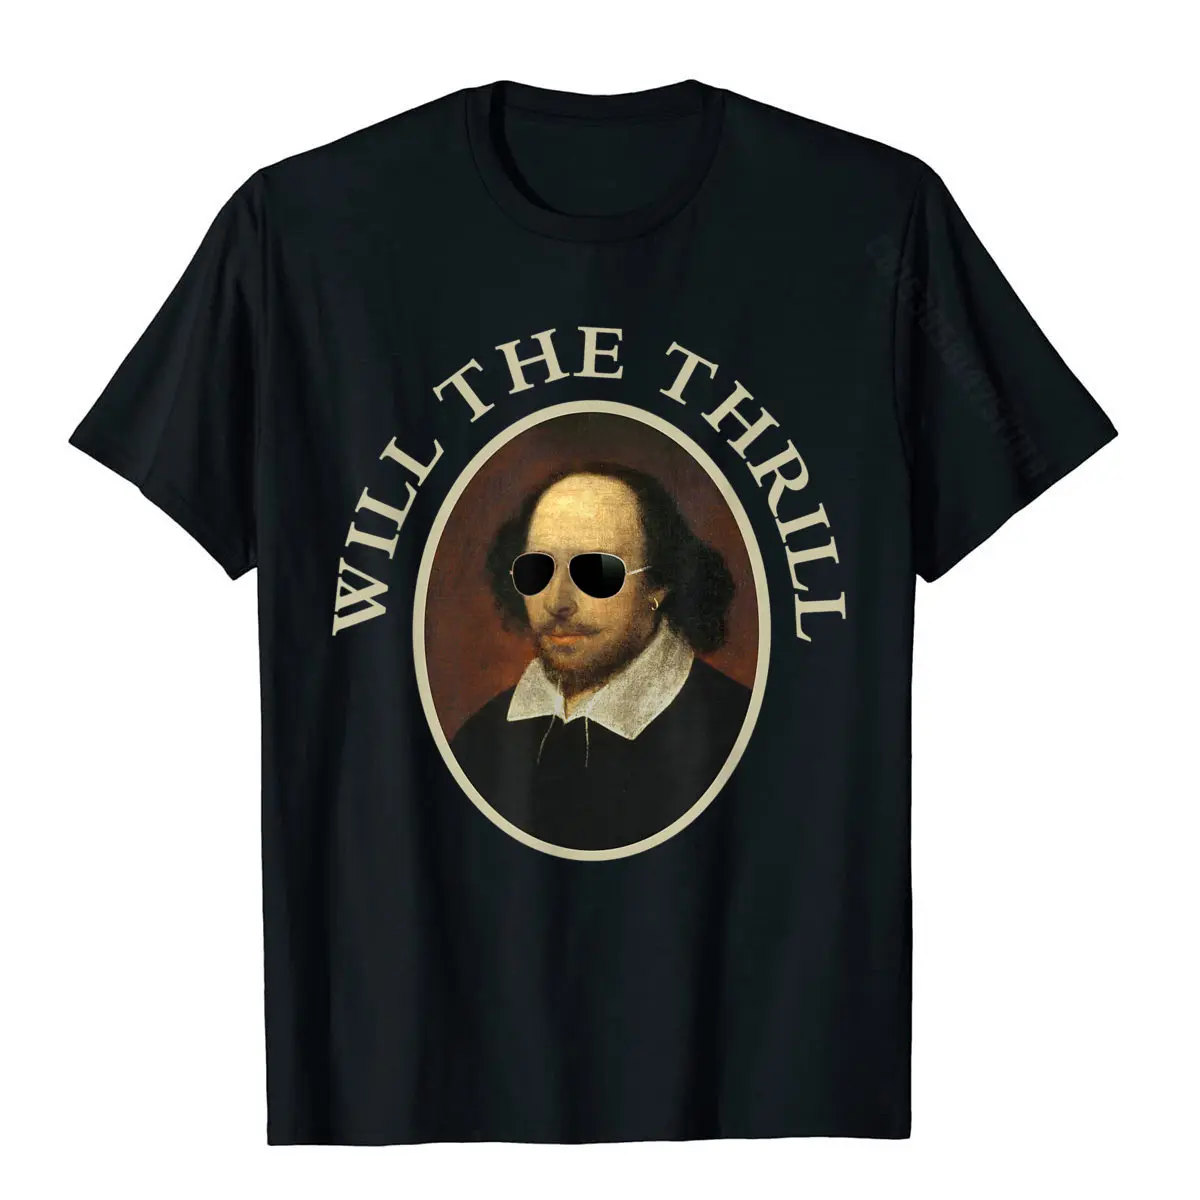 William Shakespeare Will Power Shirt Art-Postitive Quote T-Shirt T Shirts New Design Design Cotton Men Tops Tees Customized